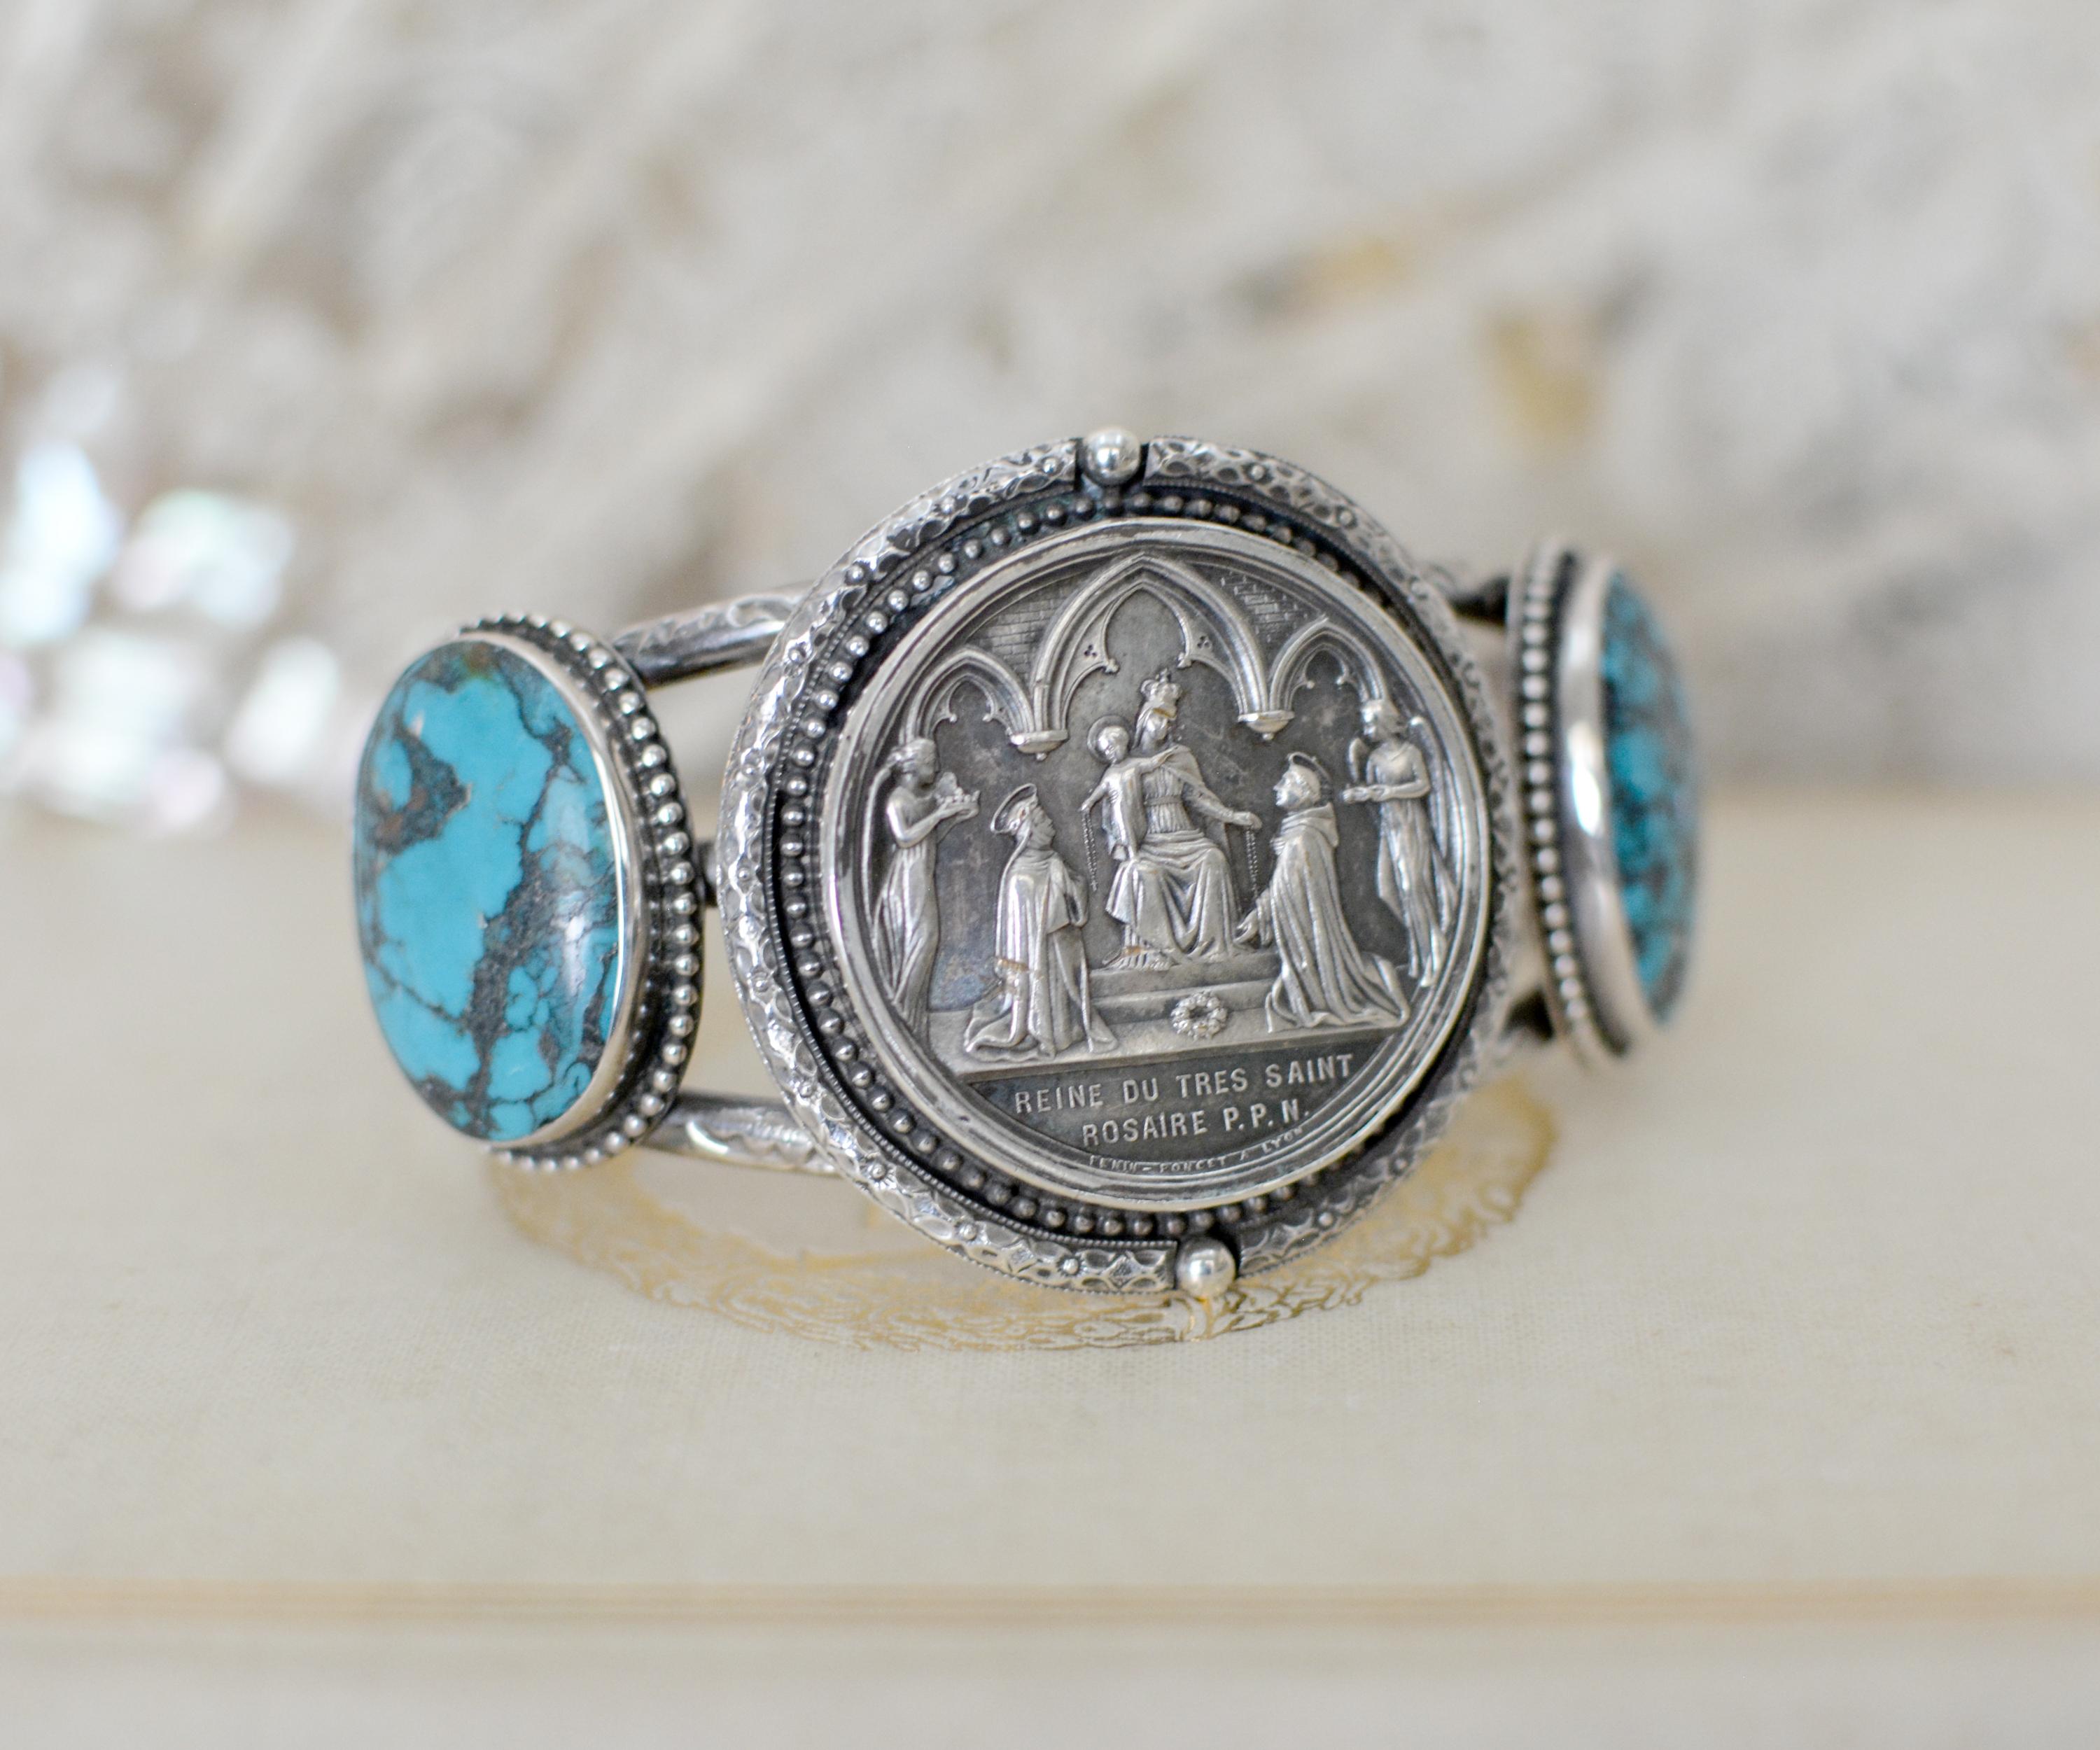 Jill Garber Antique French Wedding Medal with Turquoise Cuff Bracelet In Excellent Condition For Sale In Saginaw, MI